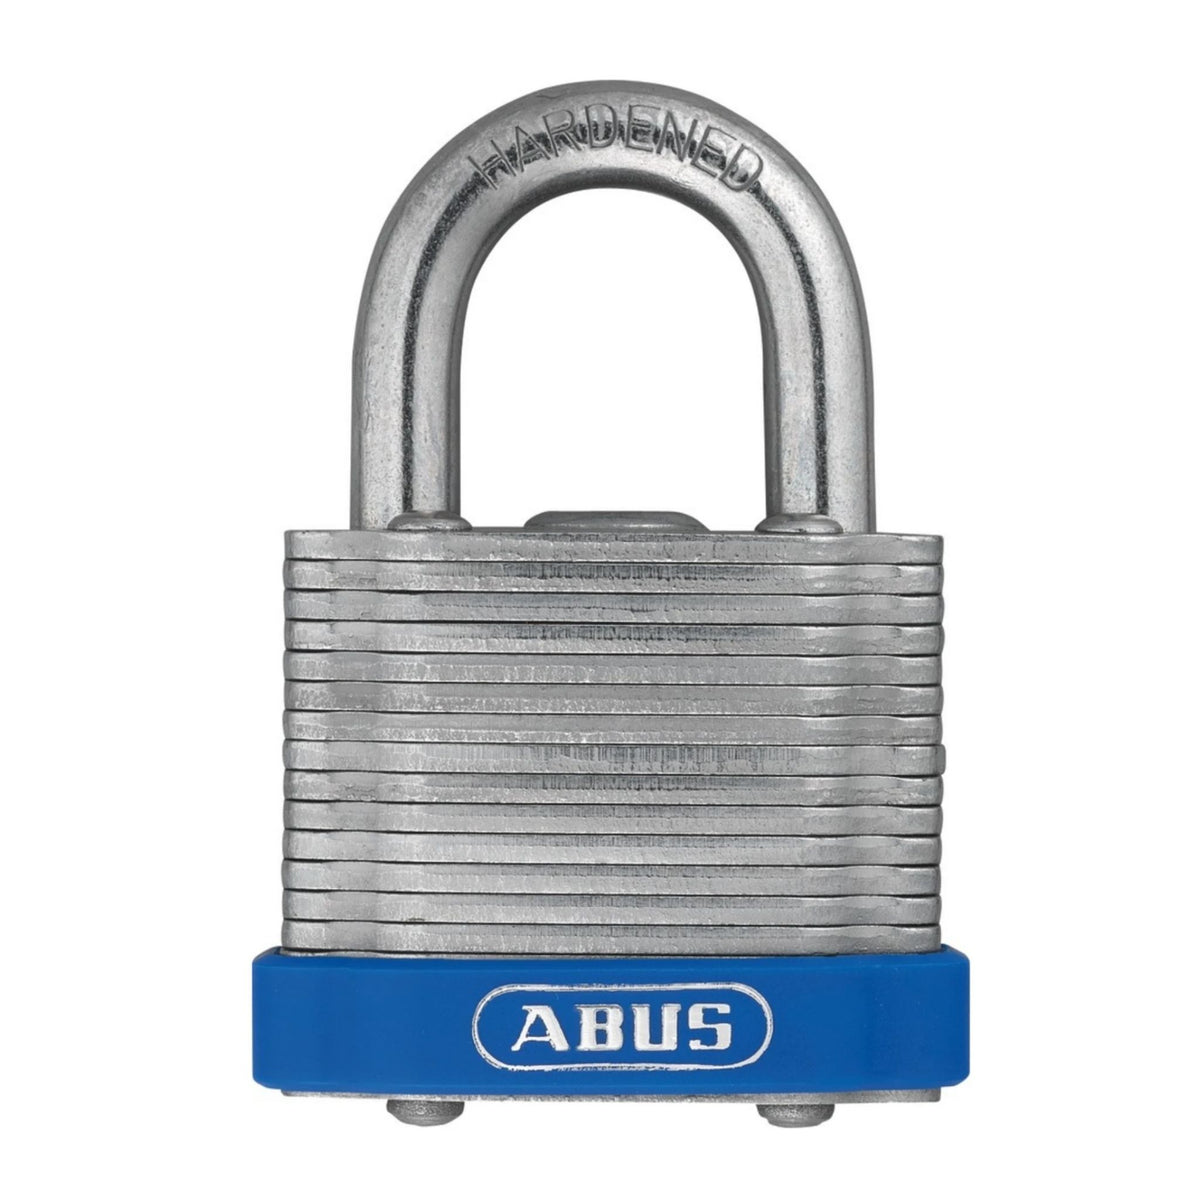 Abus 41/40 MK 0196 Laminated Steel Padlock with Blue Bumper Master Keyed to Match Existing Key System MK0196 - The Lock Source 